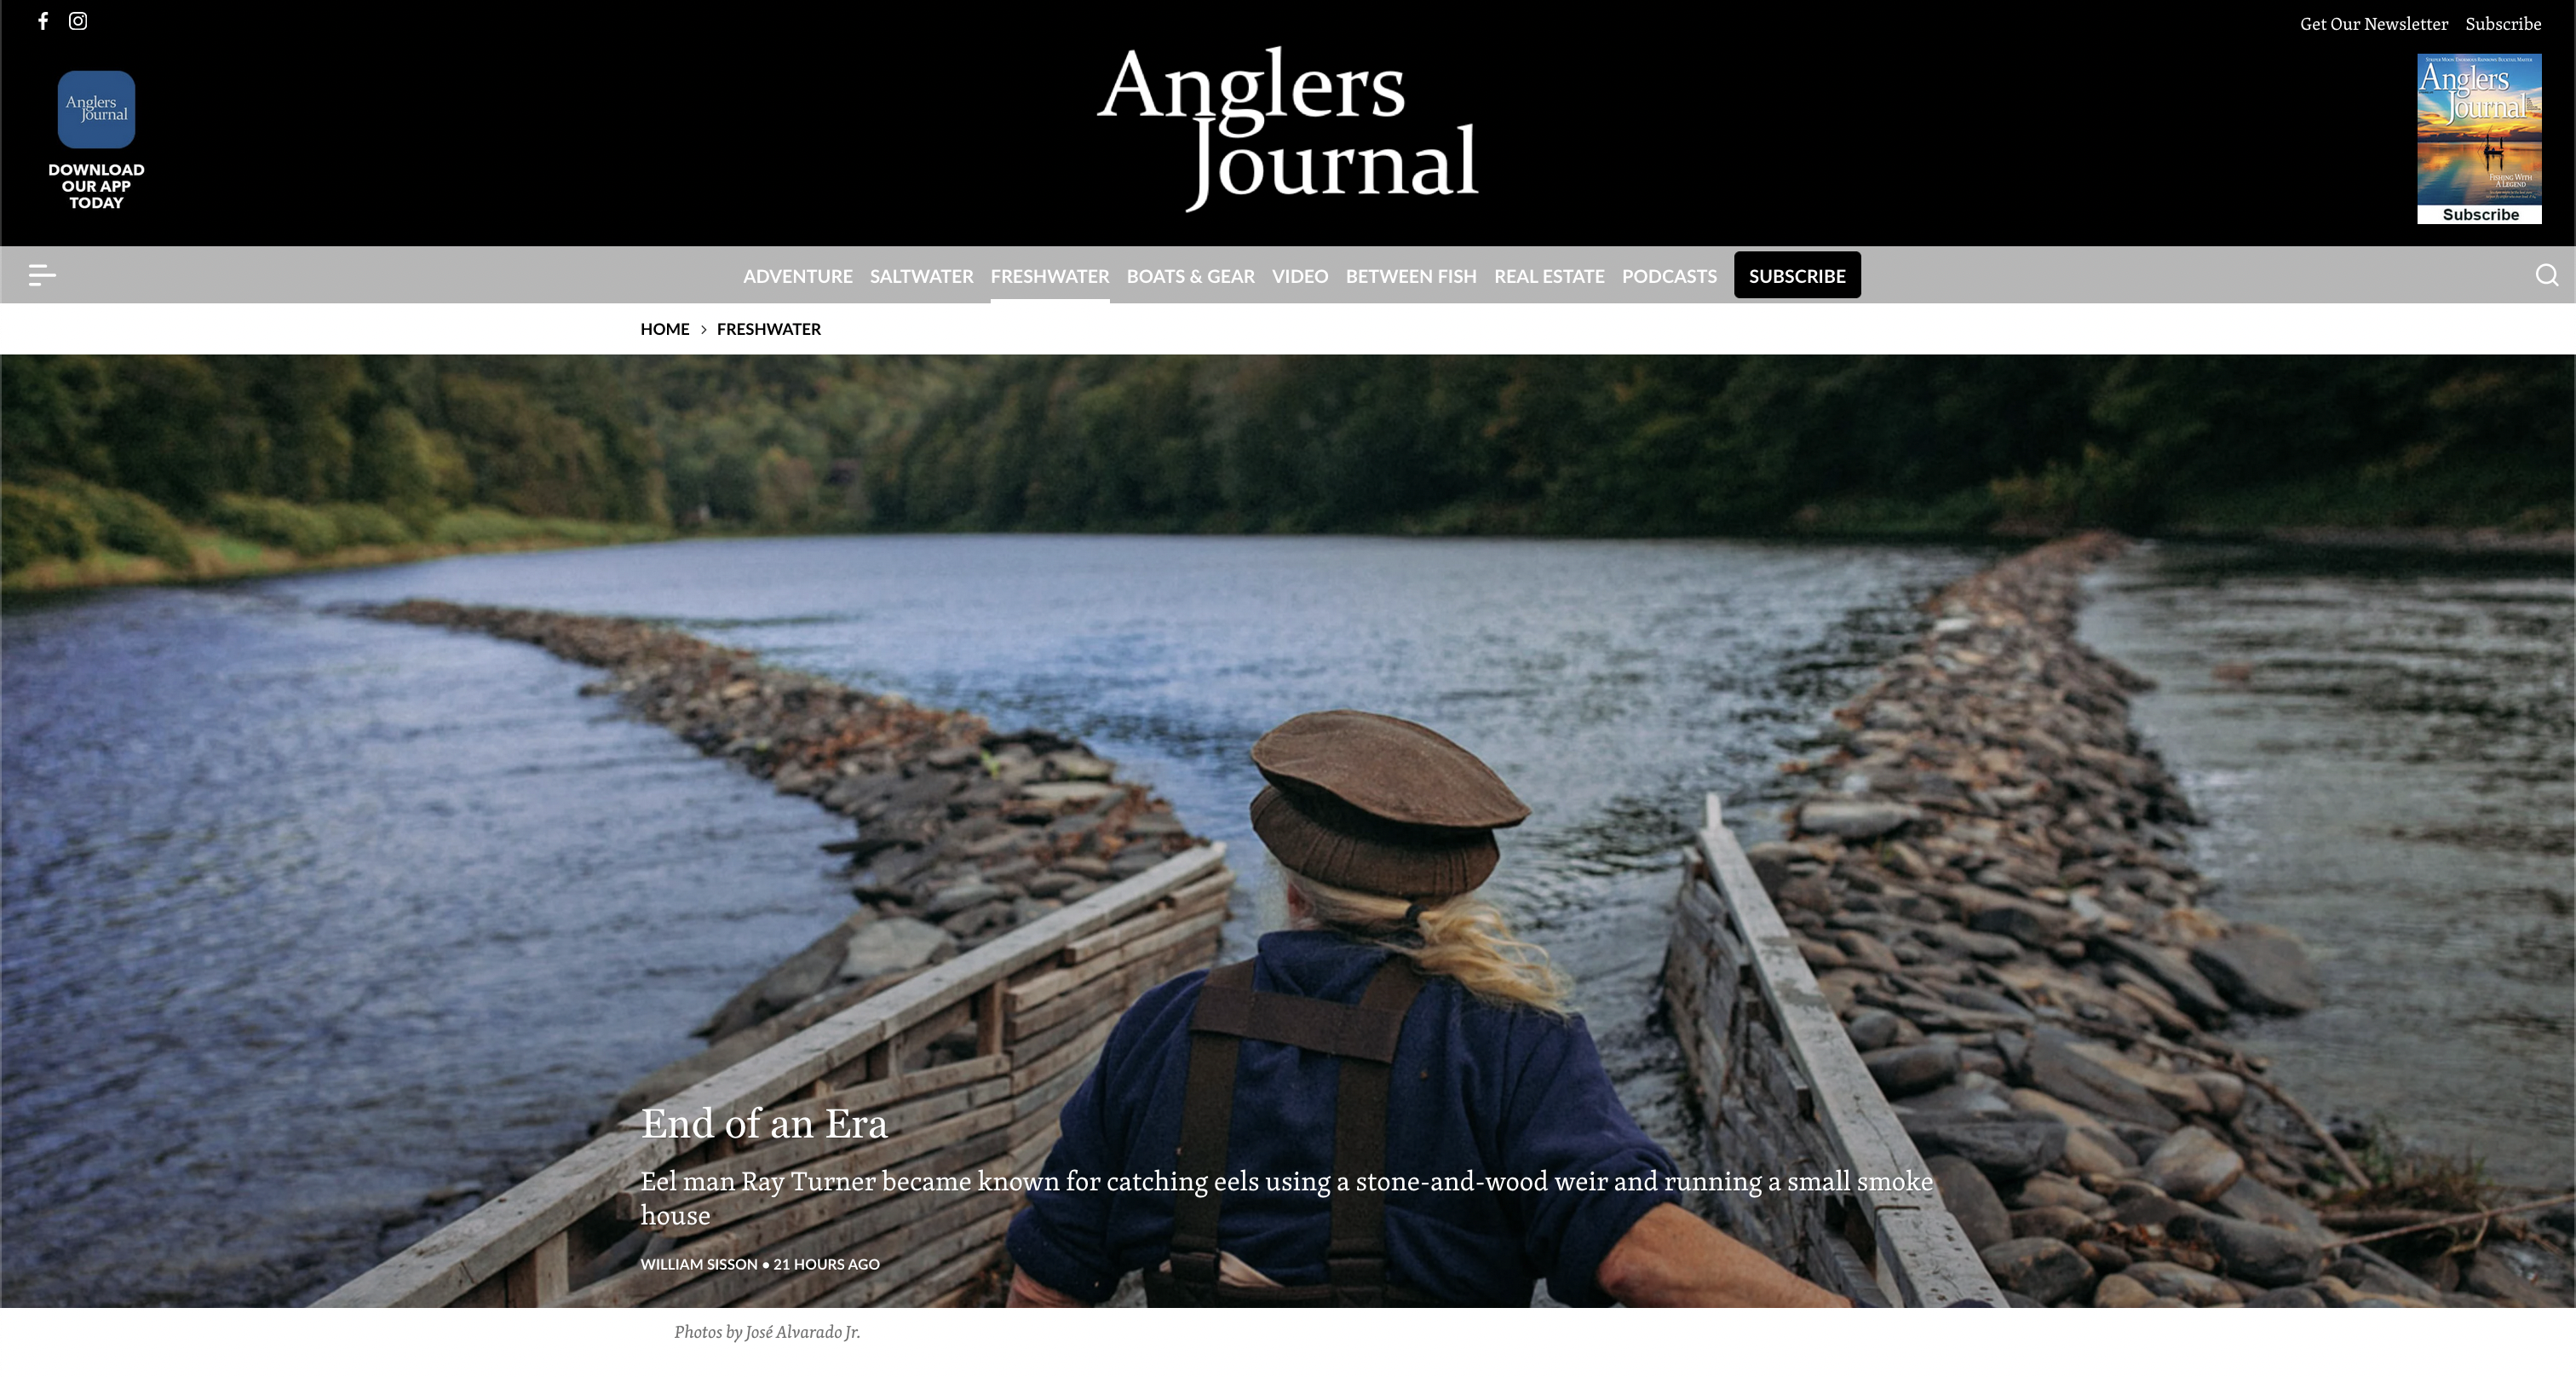 for Anglers Journal: End of an Era